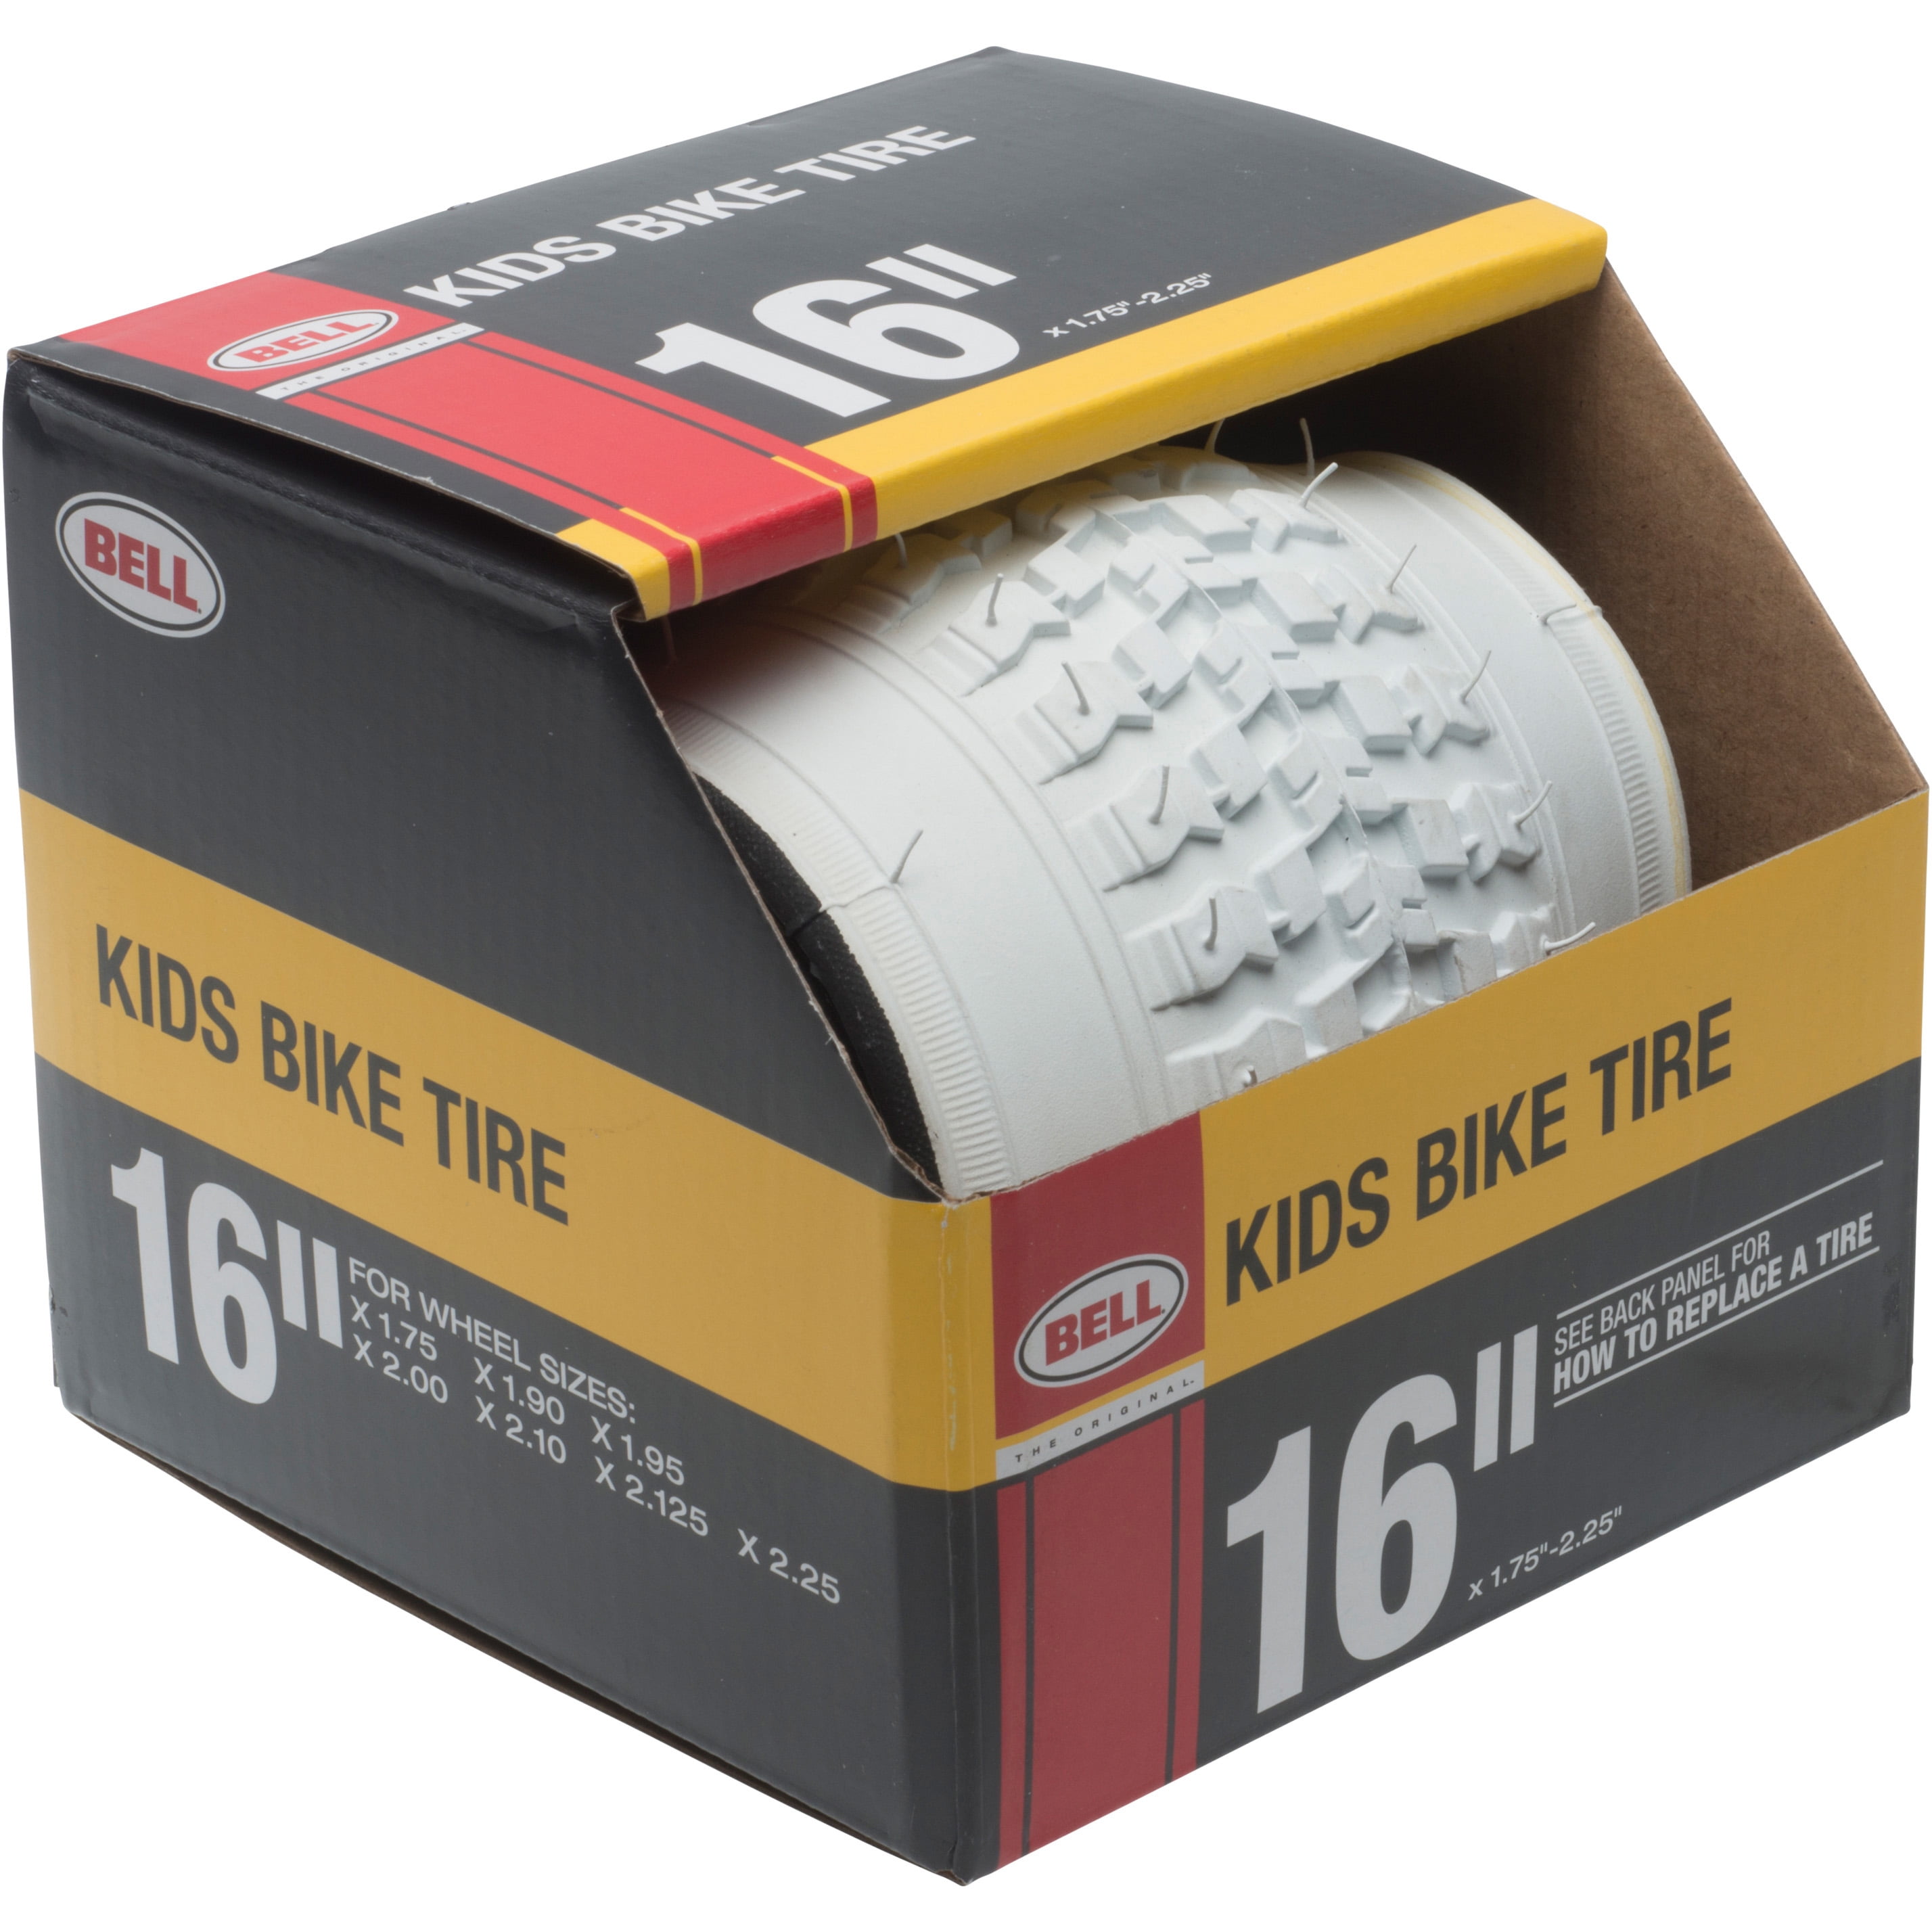 Cycles Bicycle Tire 12 1/2" x 2 1/4" for Jogger Stroller Kid Bike @45 PSI 